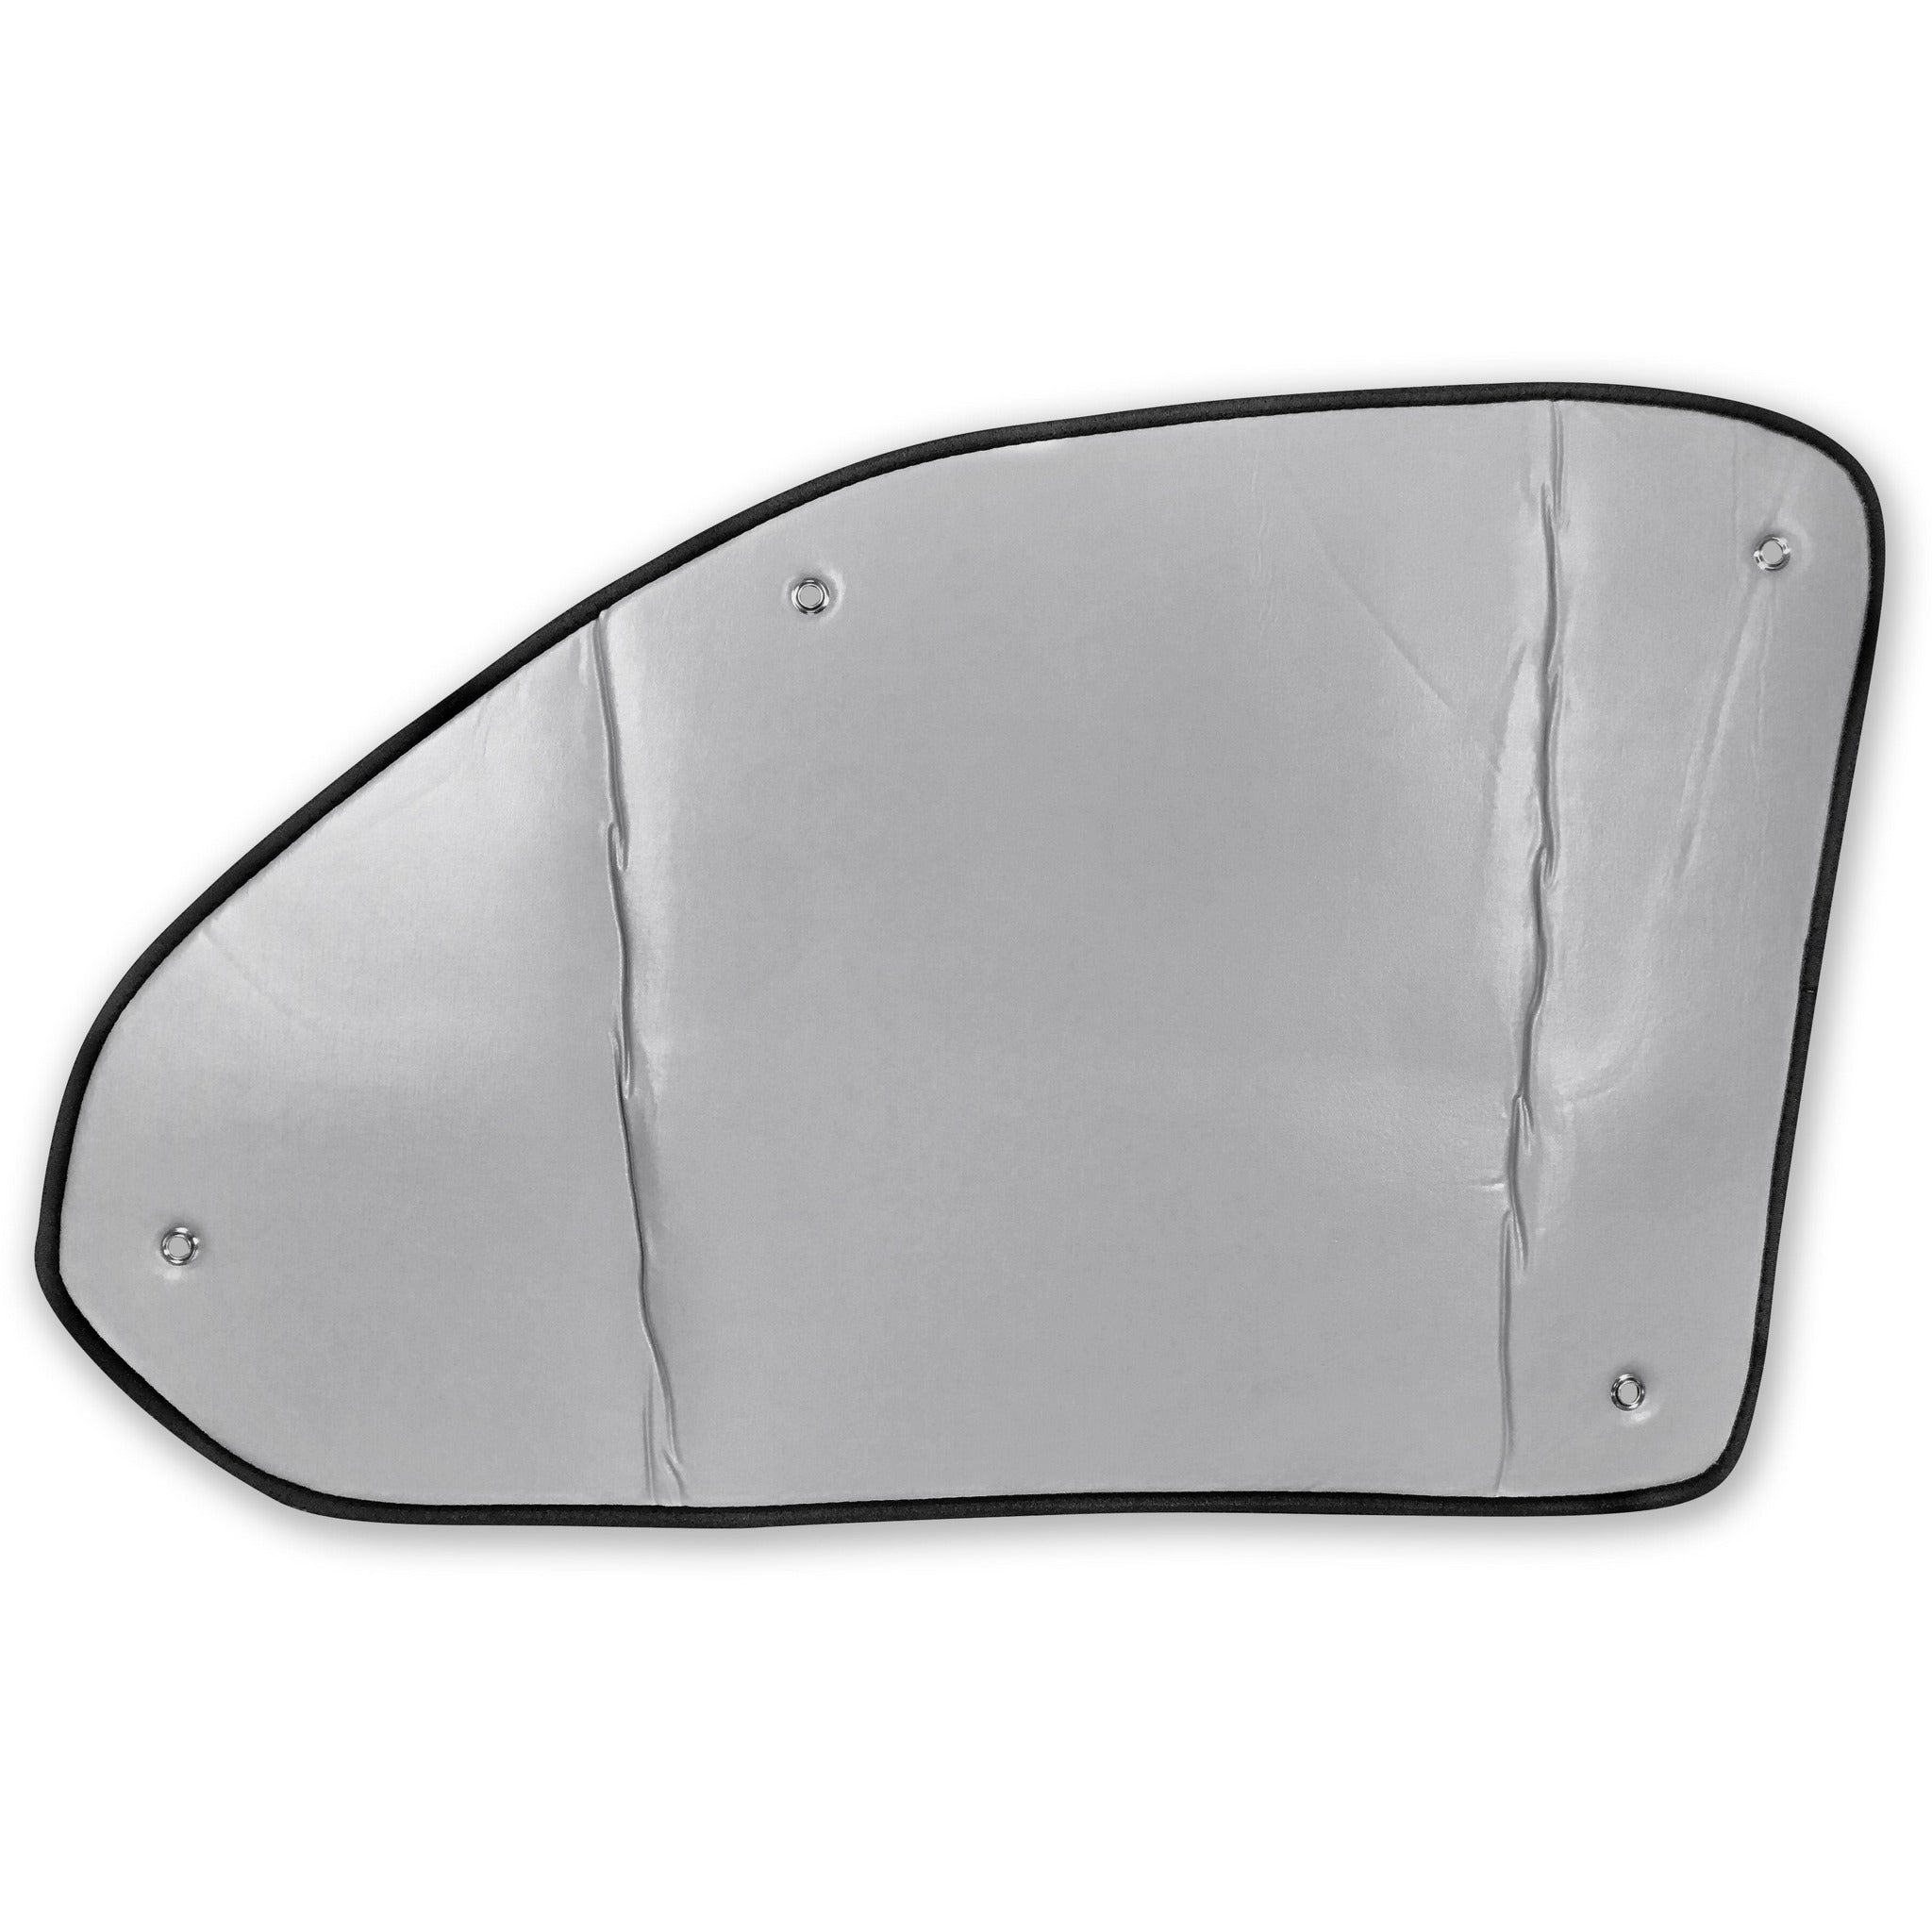 CLI-MAT NT THERMO Internal Thermal Cab Window Silver Screens - VW T5